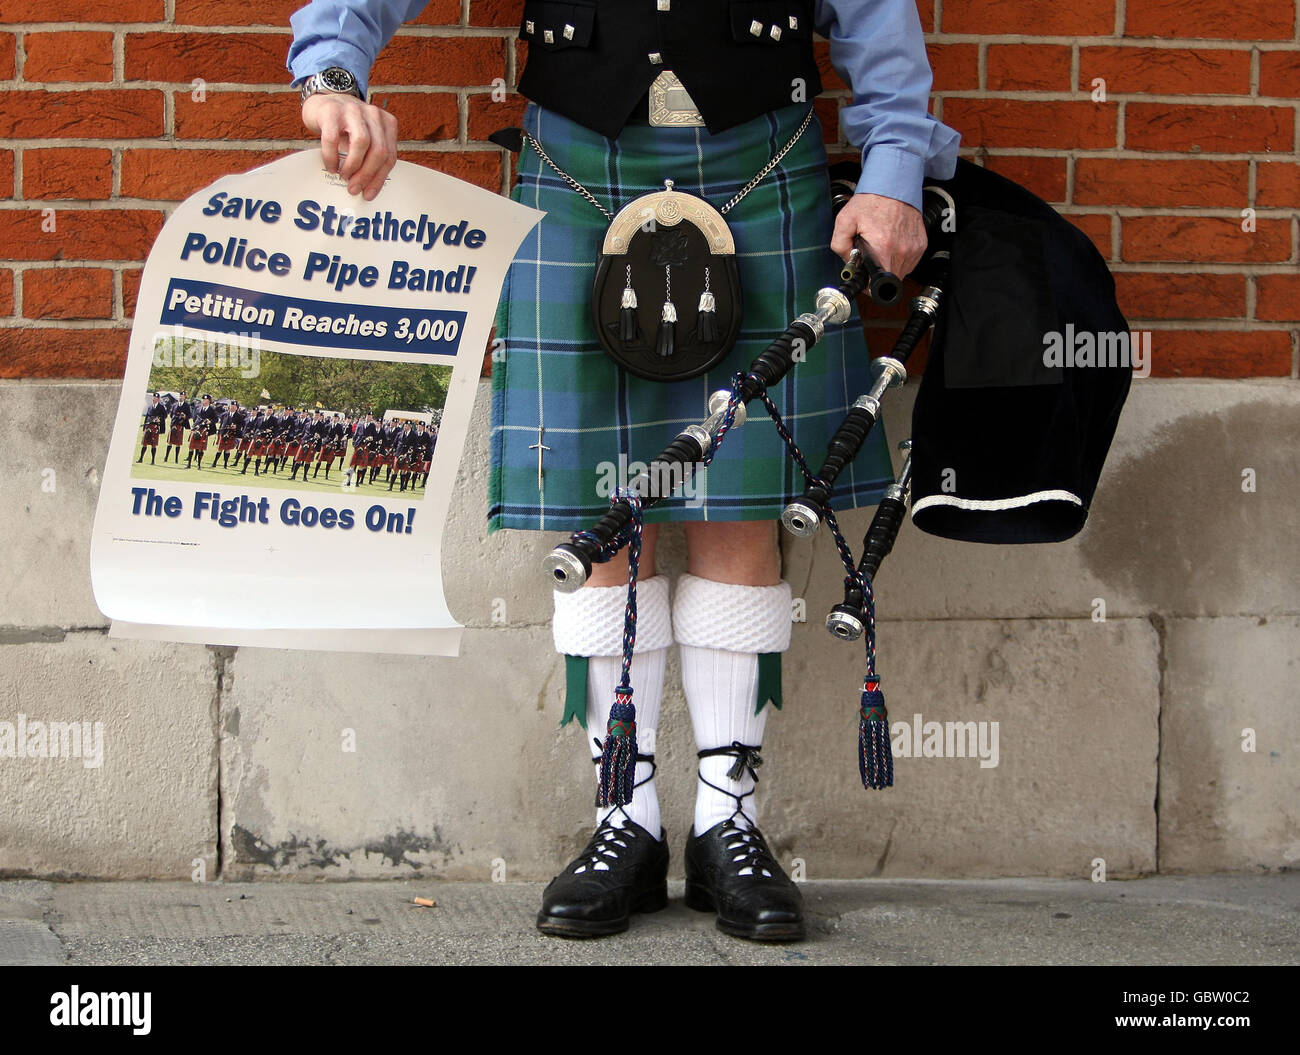 Piper Willie Park with a petition before it was presented to the Chief Constable of Strathclyde Police voicing concern over planned cuts to the force's pipe band in Glasgow. Stock Photo